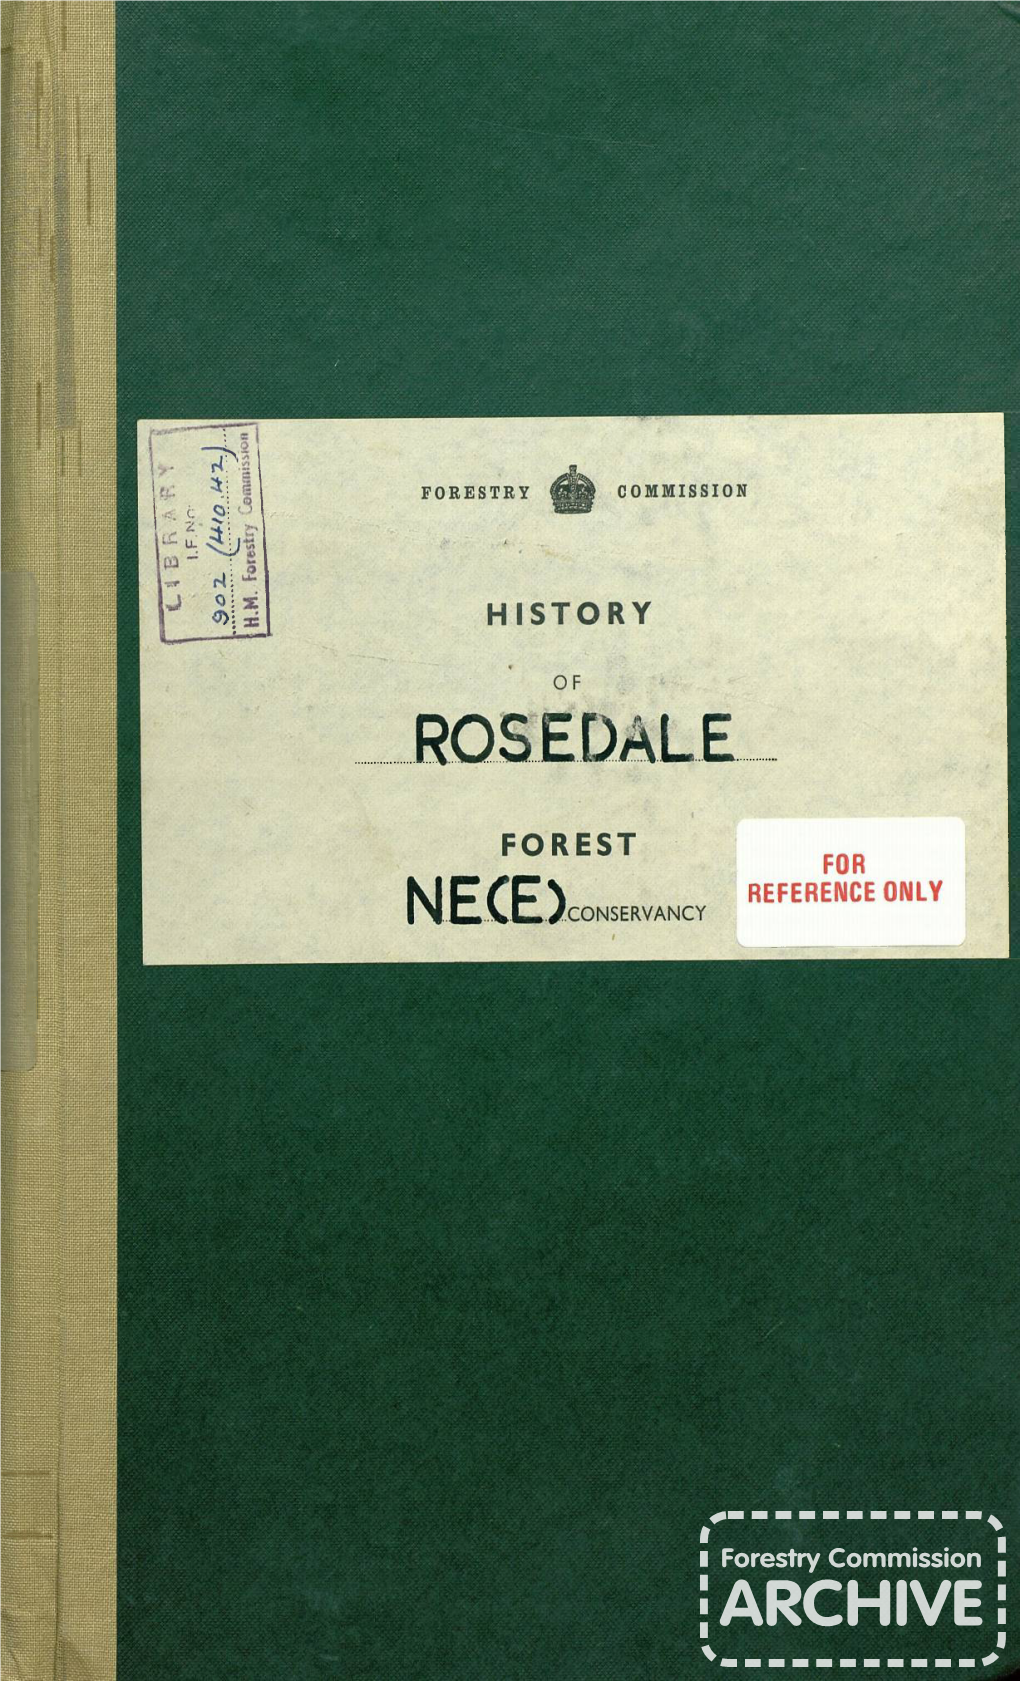 Rosedale Forest